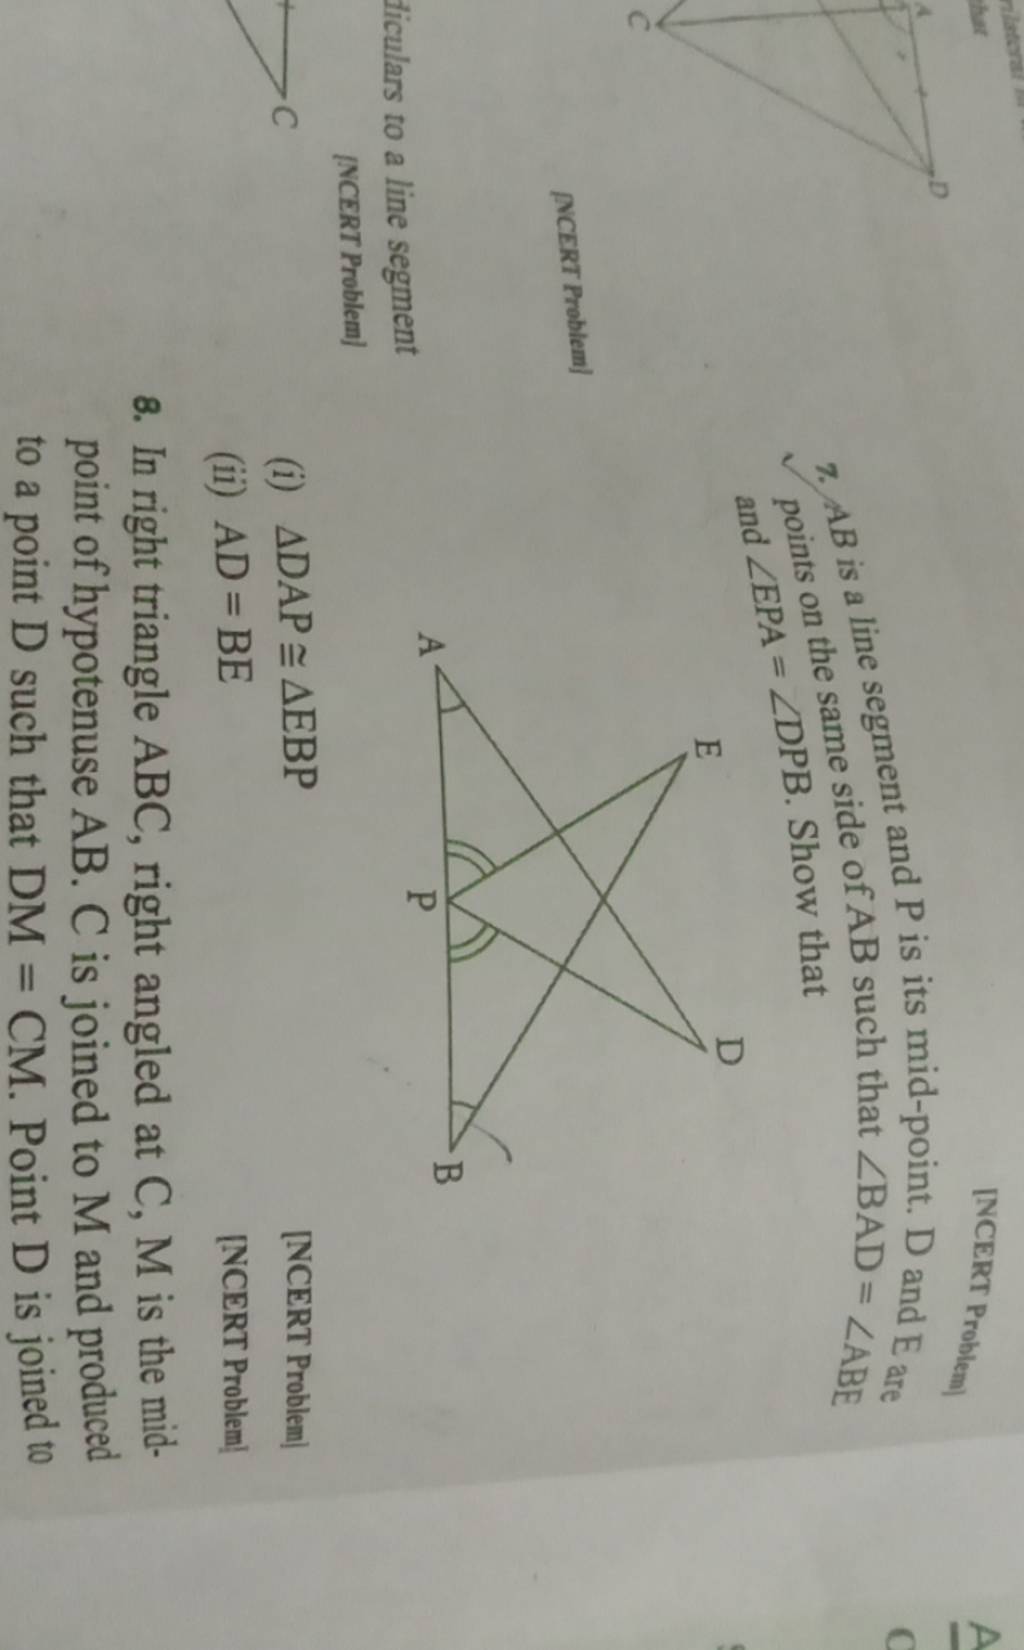 Ncert Problem 7 Ab Is A Line Segment And P Is Its Mid Point D And E A 7364